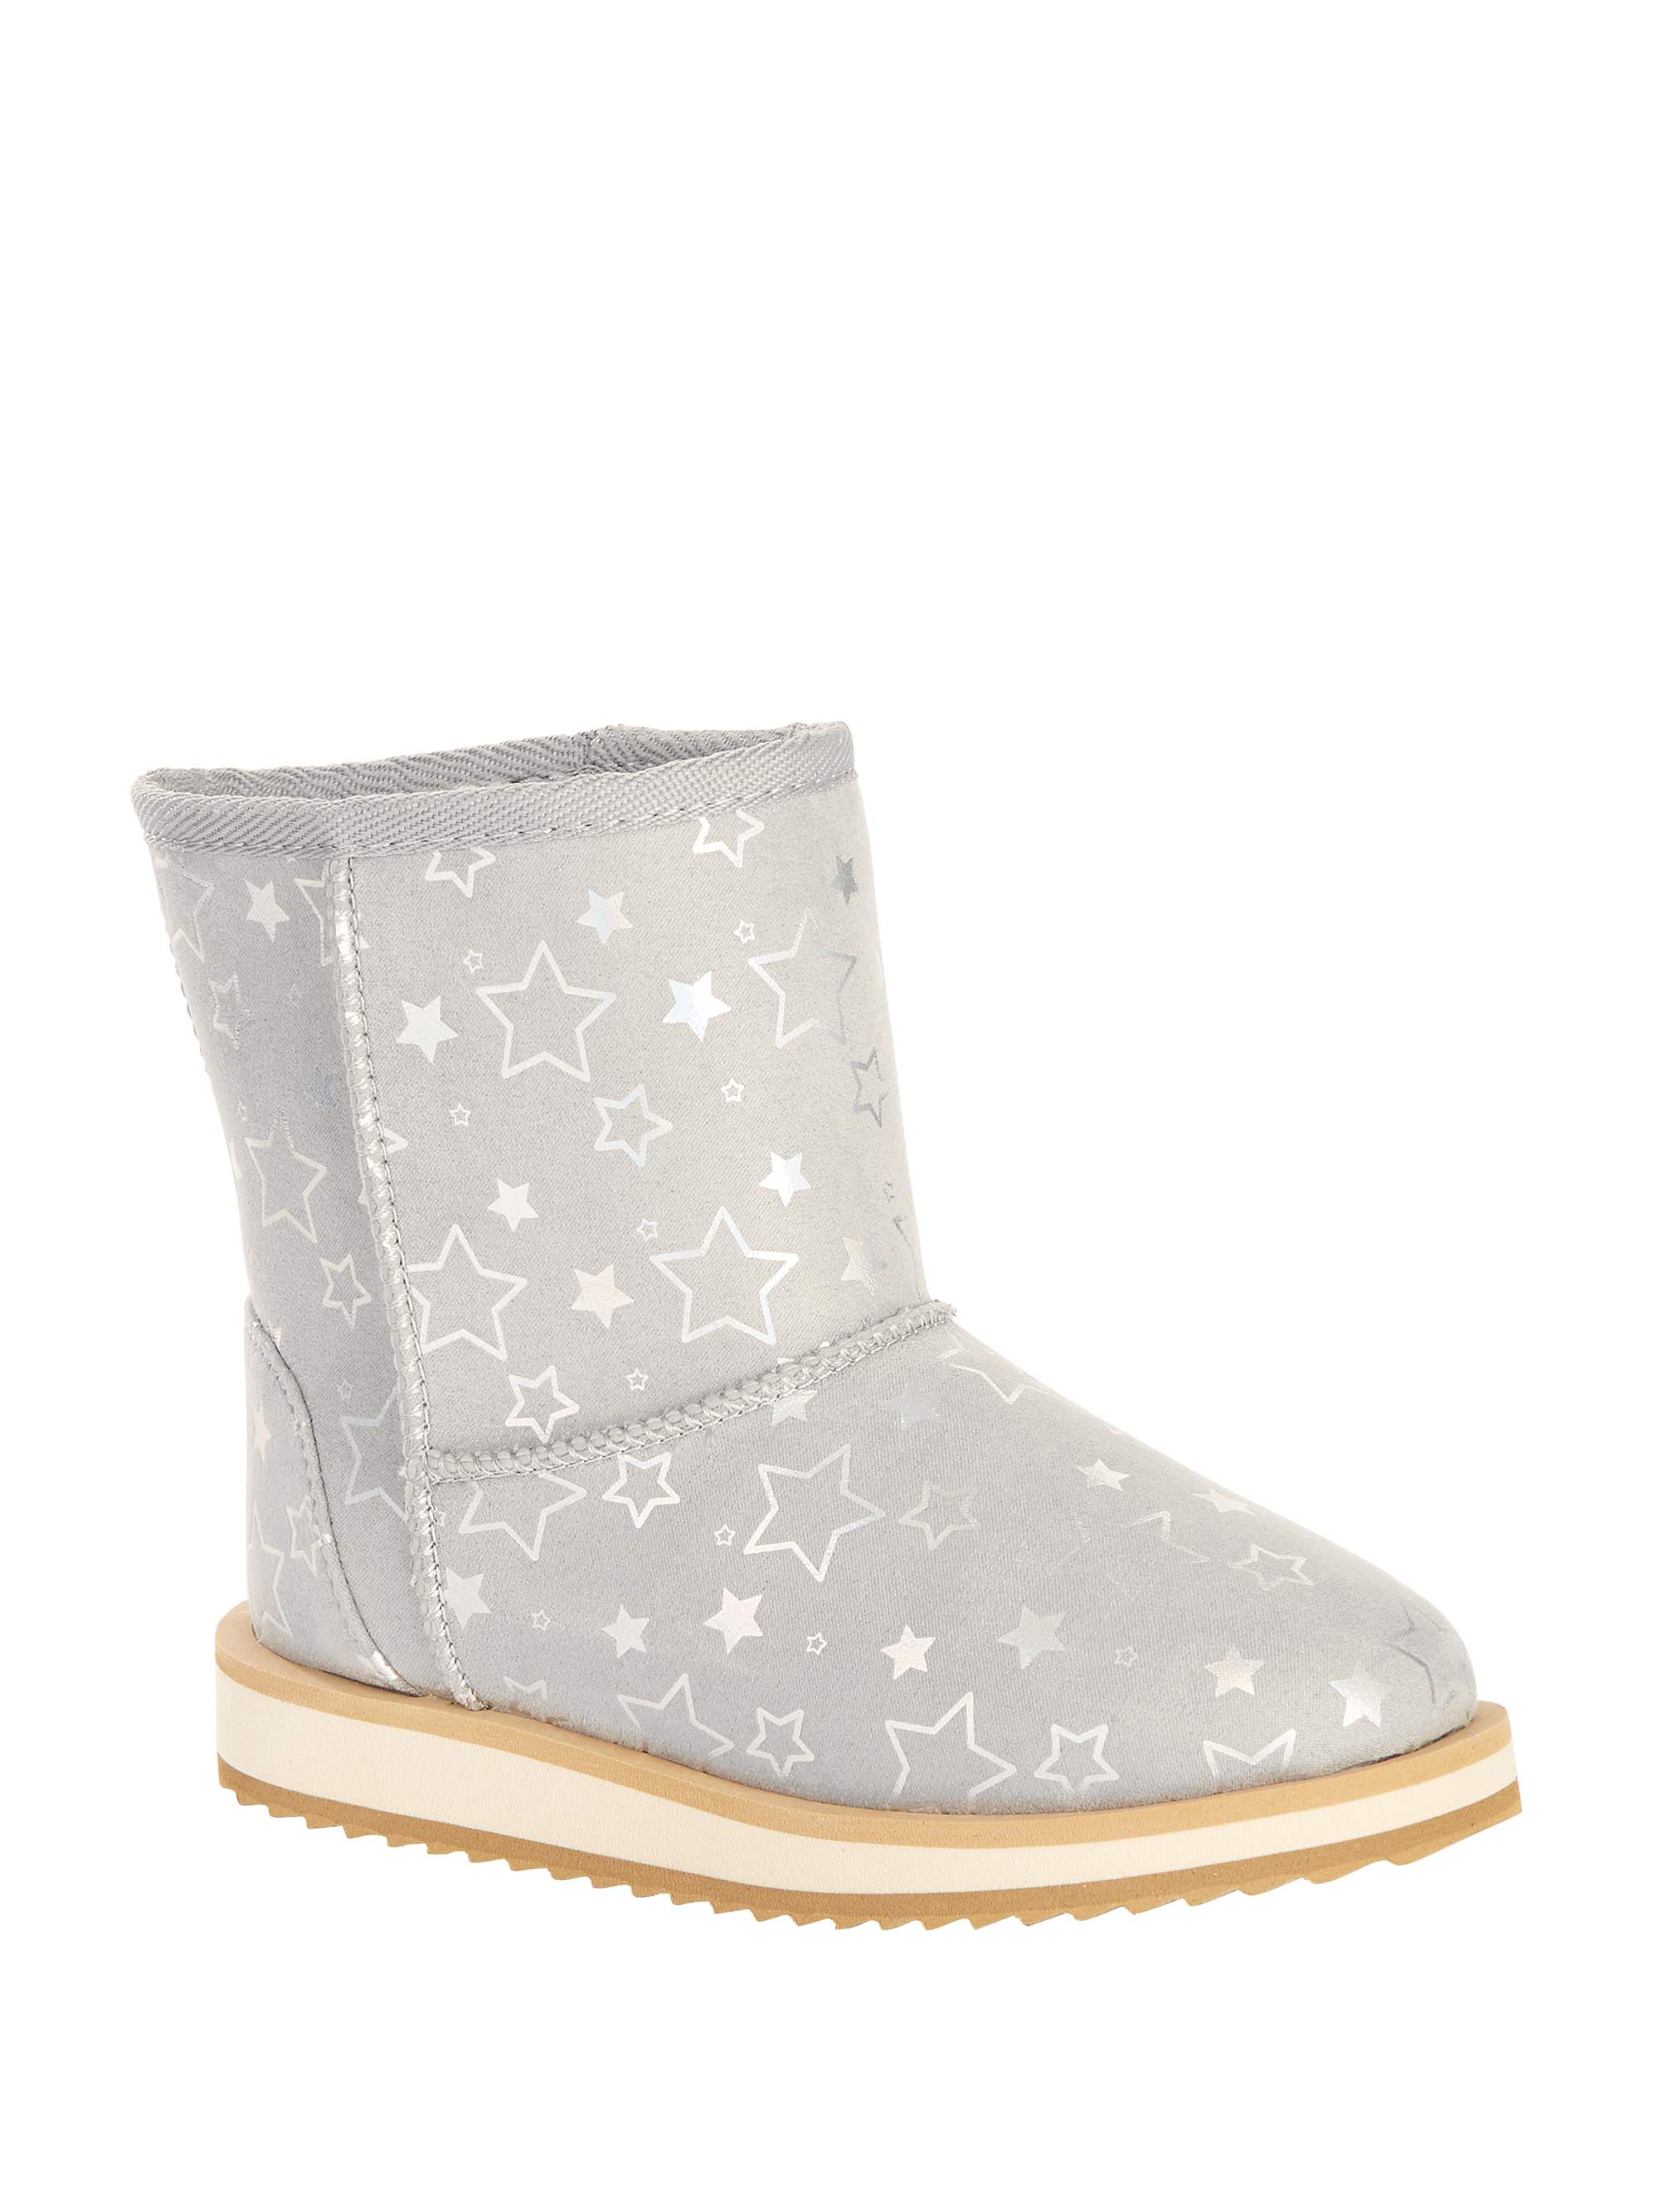 Wonder Nation Girls Faux Shearling Boots - image 1 of 6